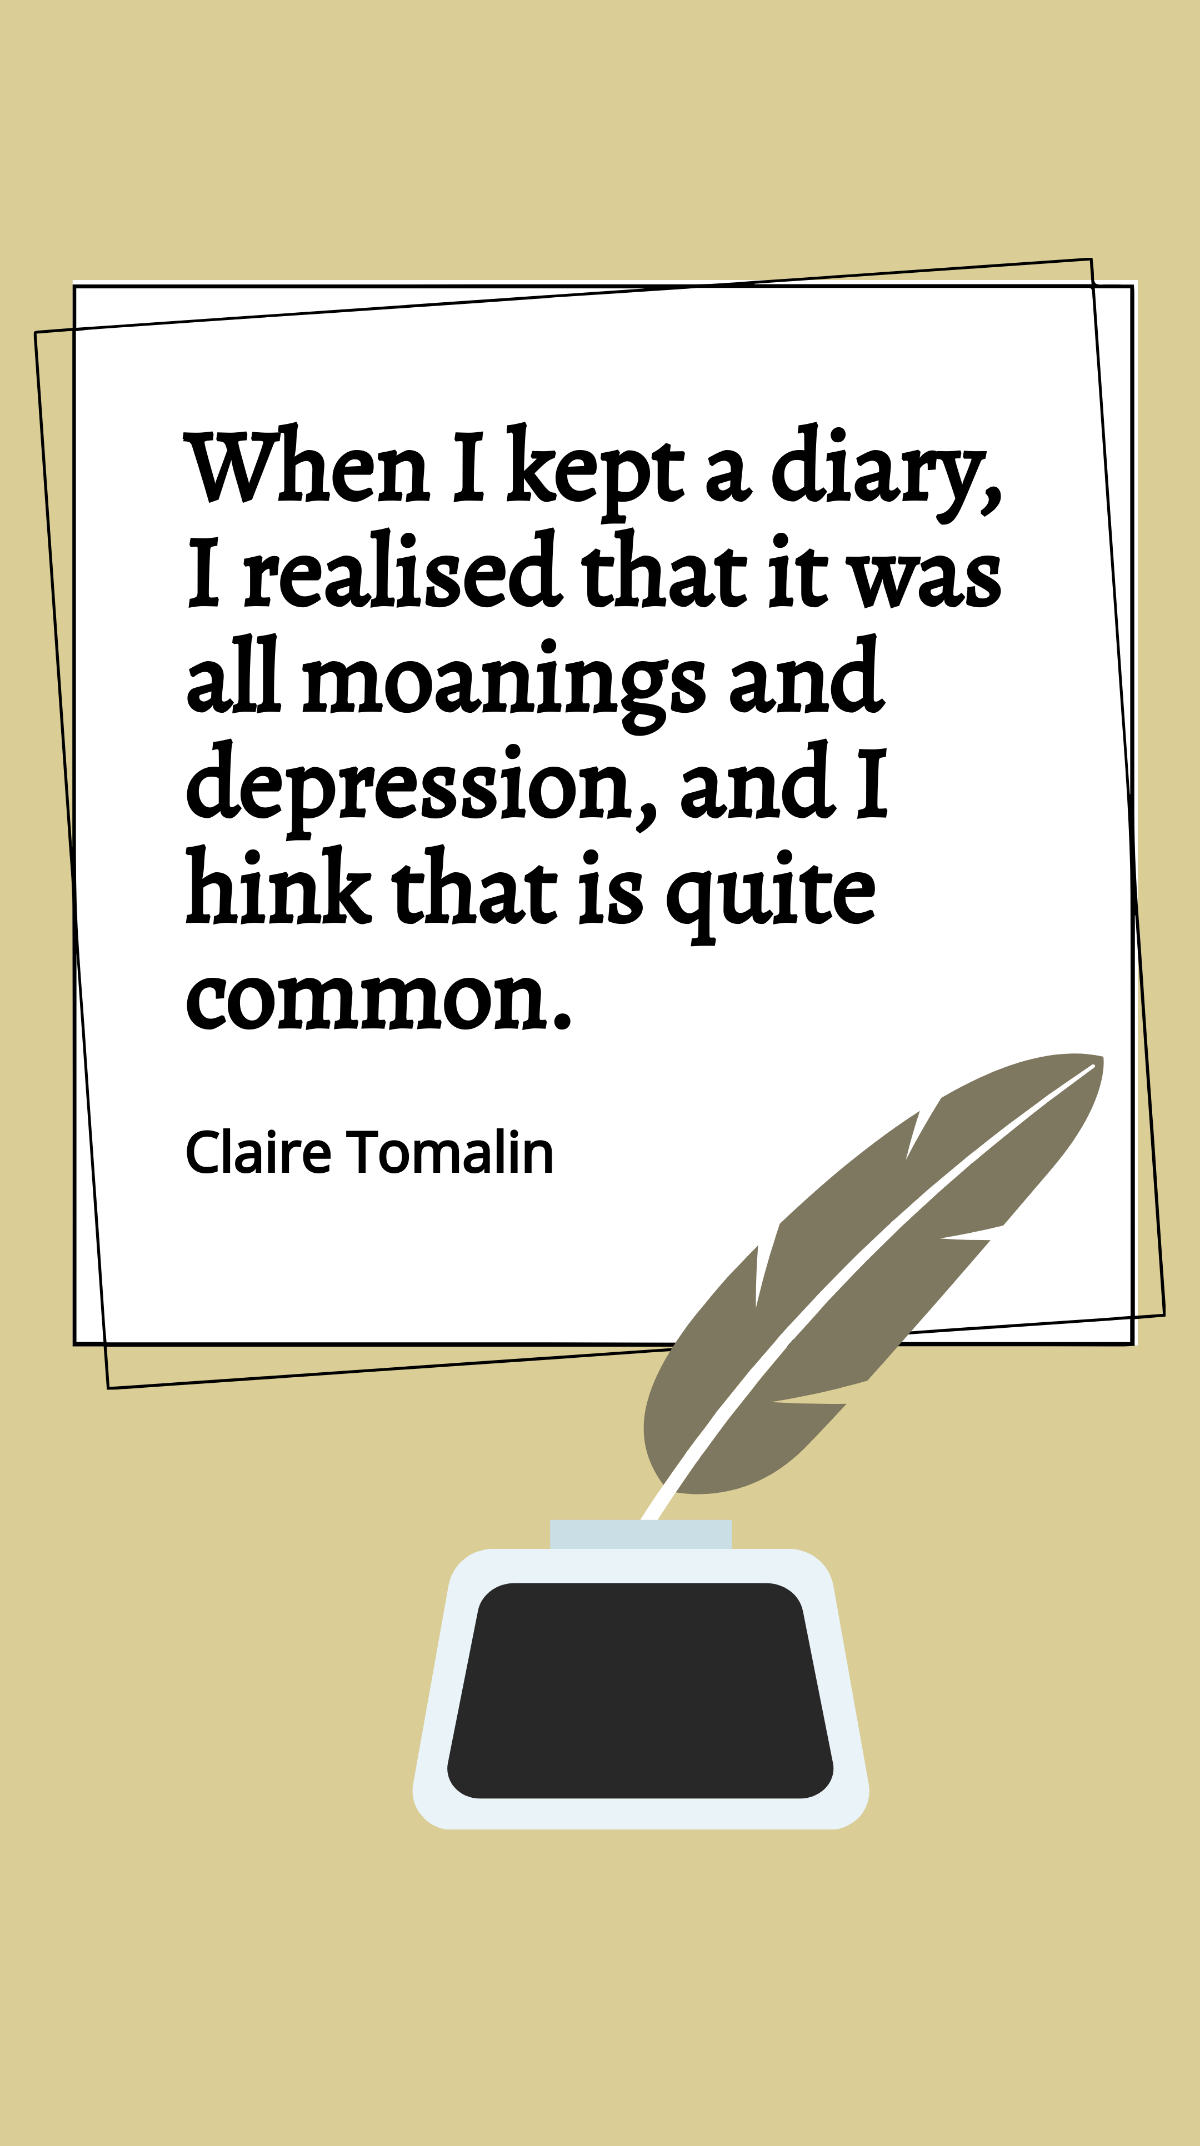 Claire Tomalin - When I kept a diary, I realised that it was all moanings and depression, and I think that is quite common. Template